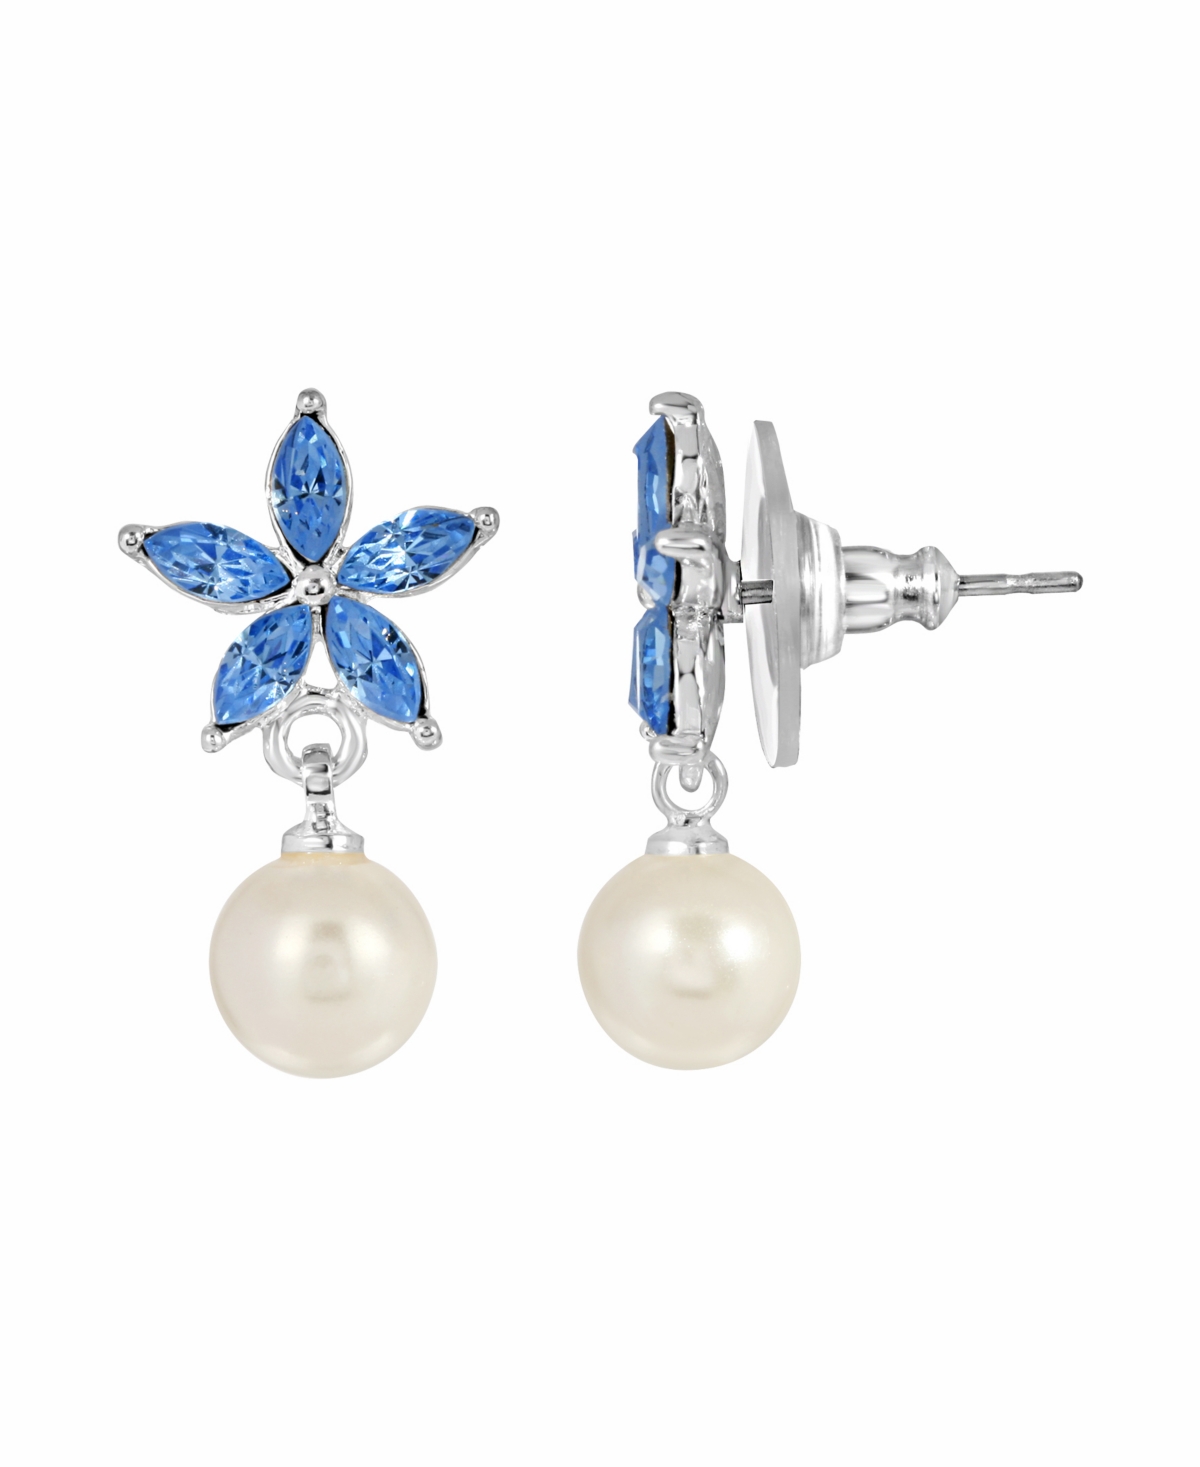 2028 Women's Crystal And Simulated Imitation Pearl Flower Drop Earrings In Blue